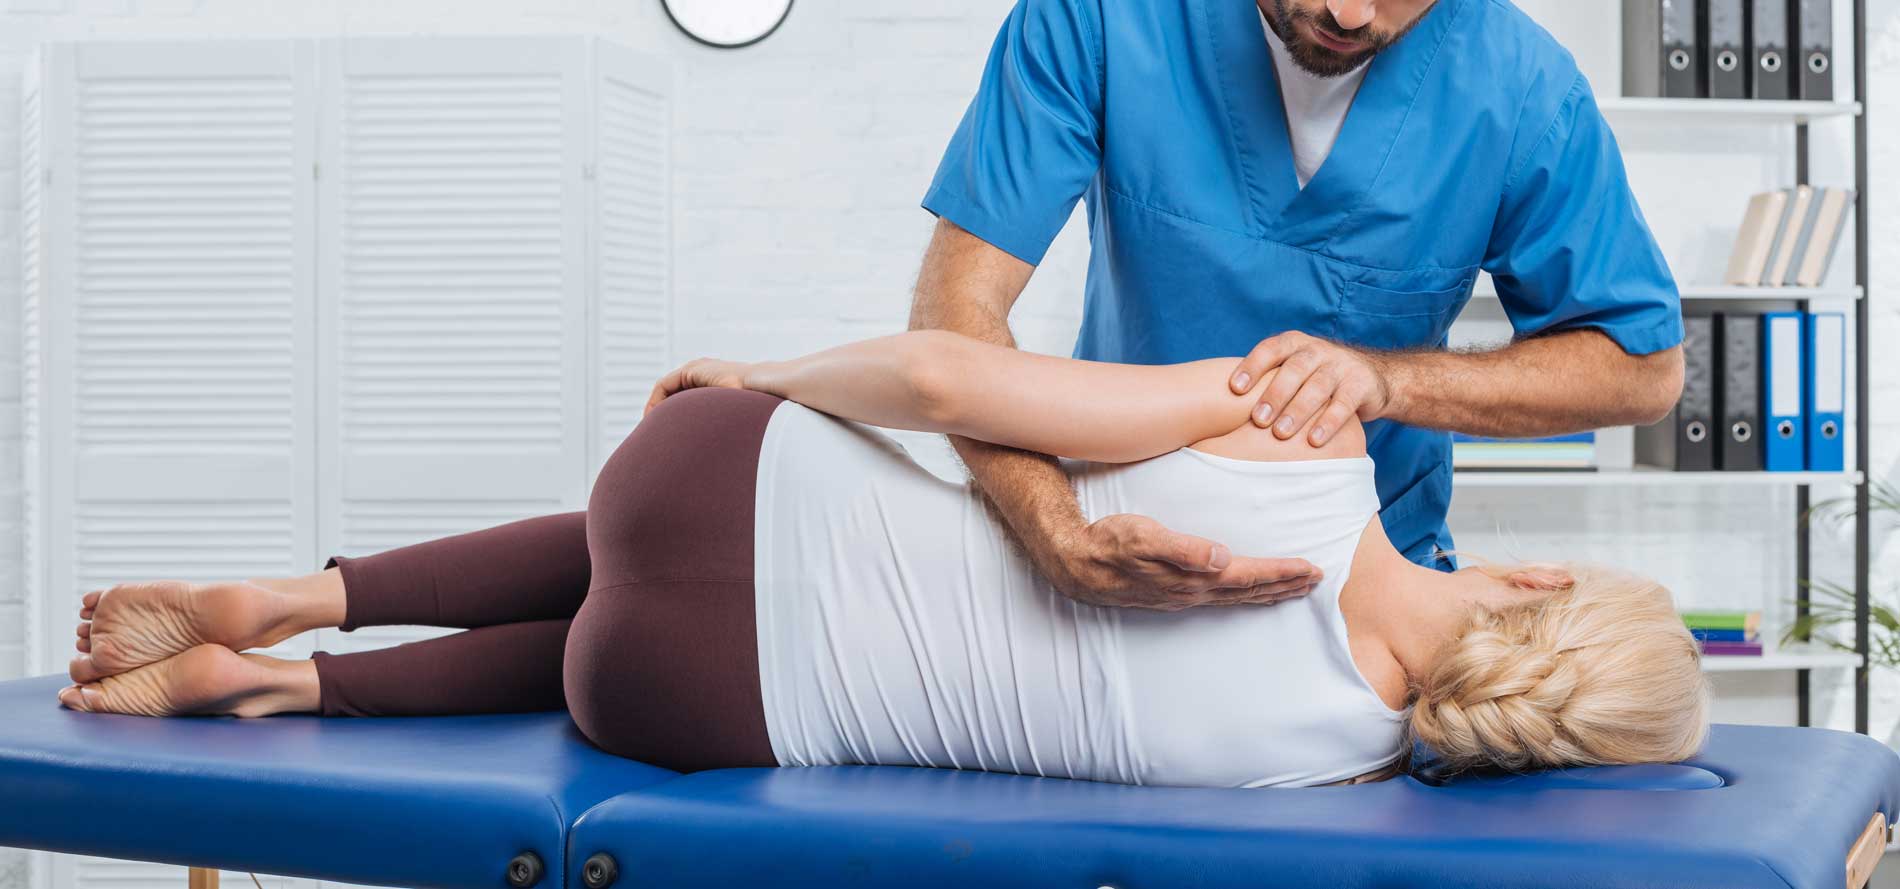 professional-osteopath-worker-giving-back-and-hip-treatment